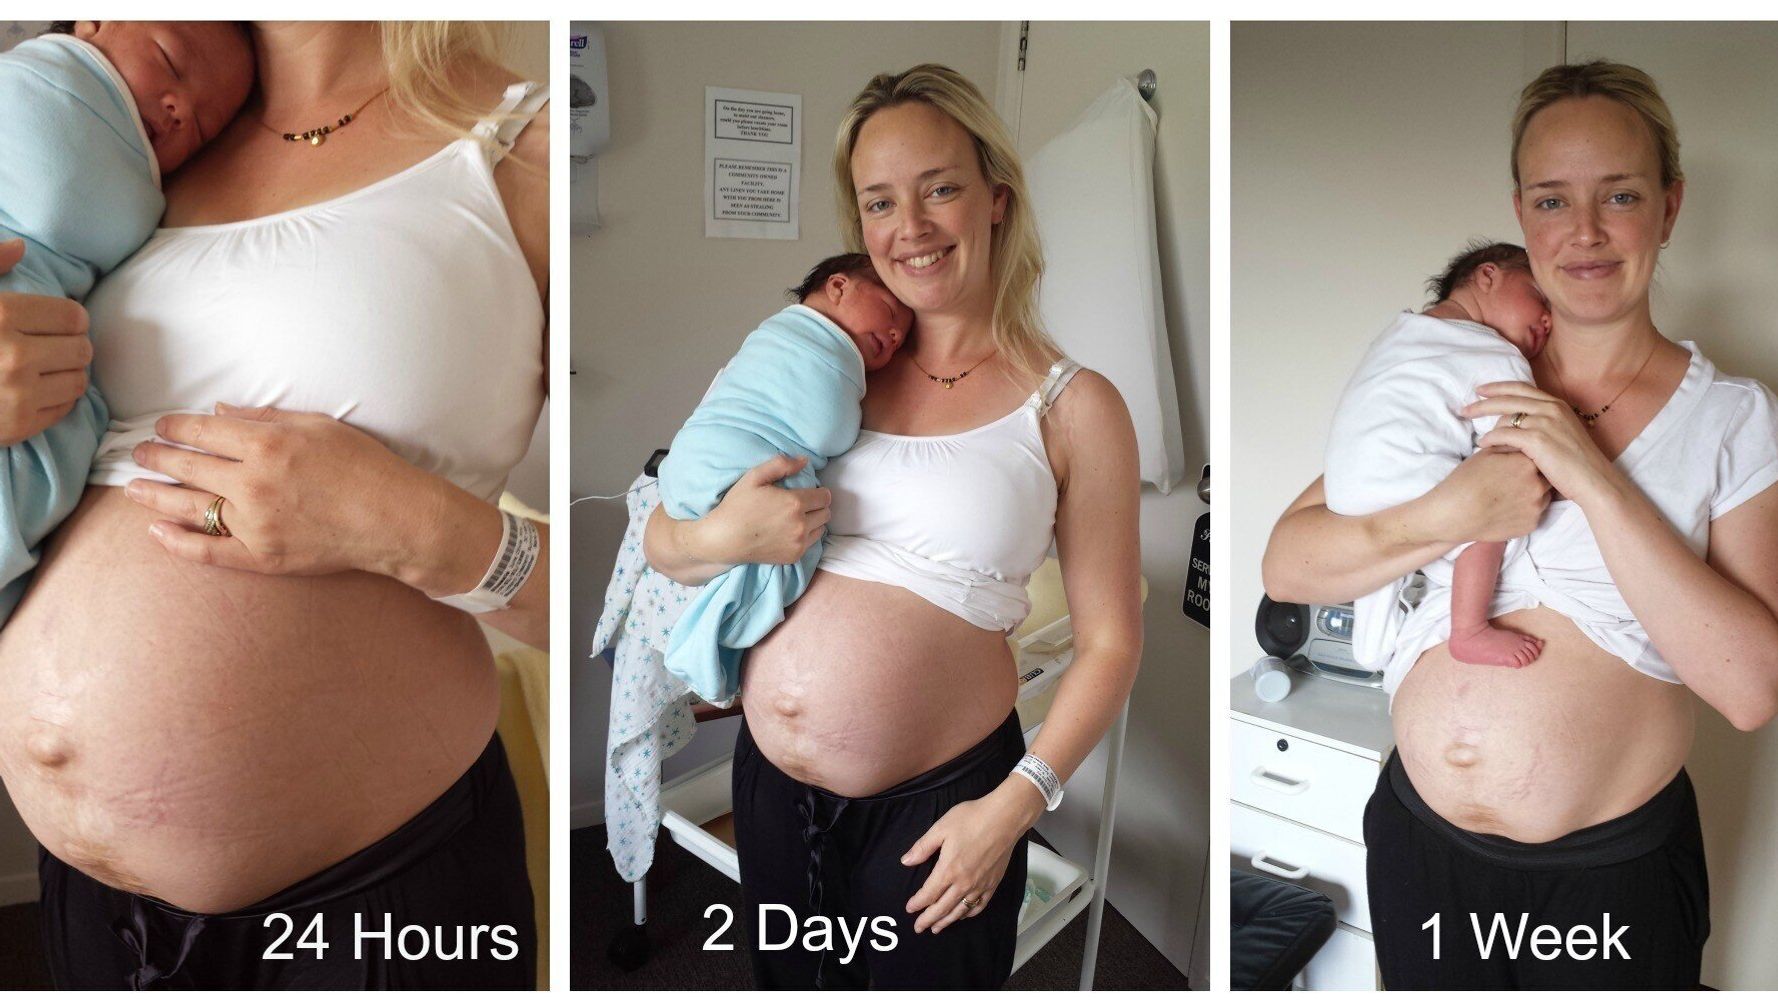 I'm fed up of seeing photos of mums and their 'snap back' post-baby bodies  - it's isolating to new mums and unhealthy